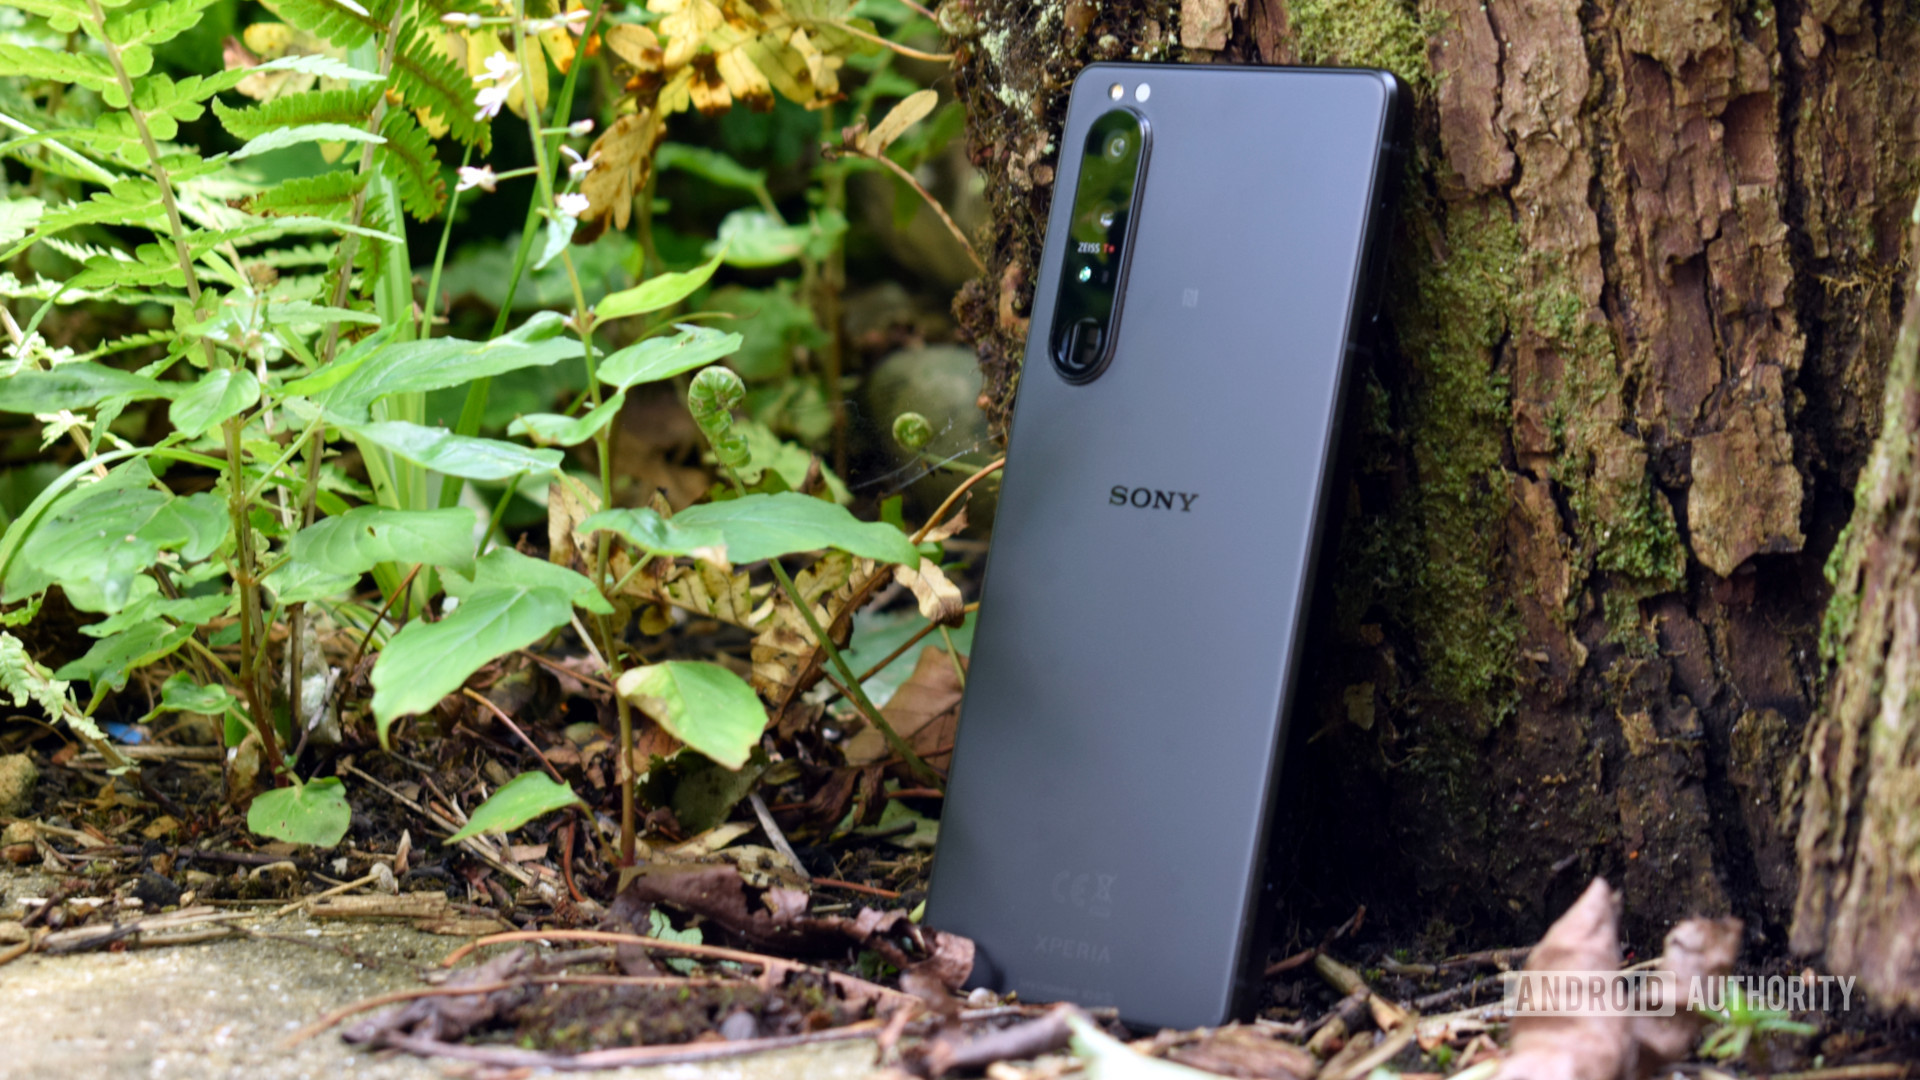 The Sony Xperia 1 III phone showing the rear of the phone and the camera module, propped up in portrait mode against a tree outside.